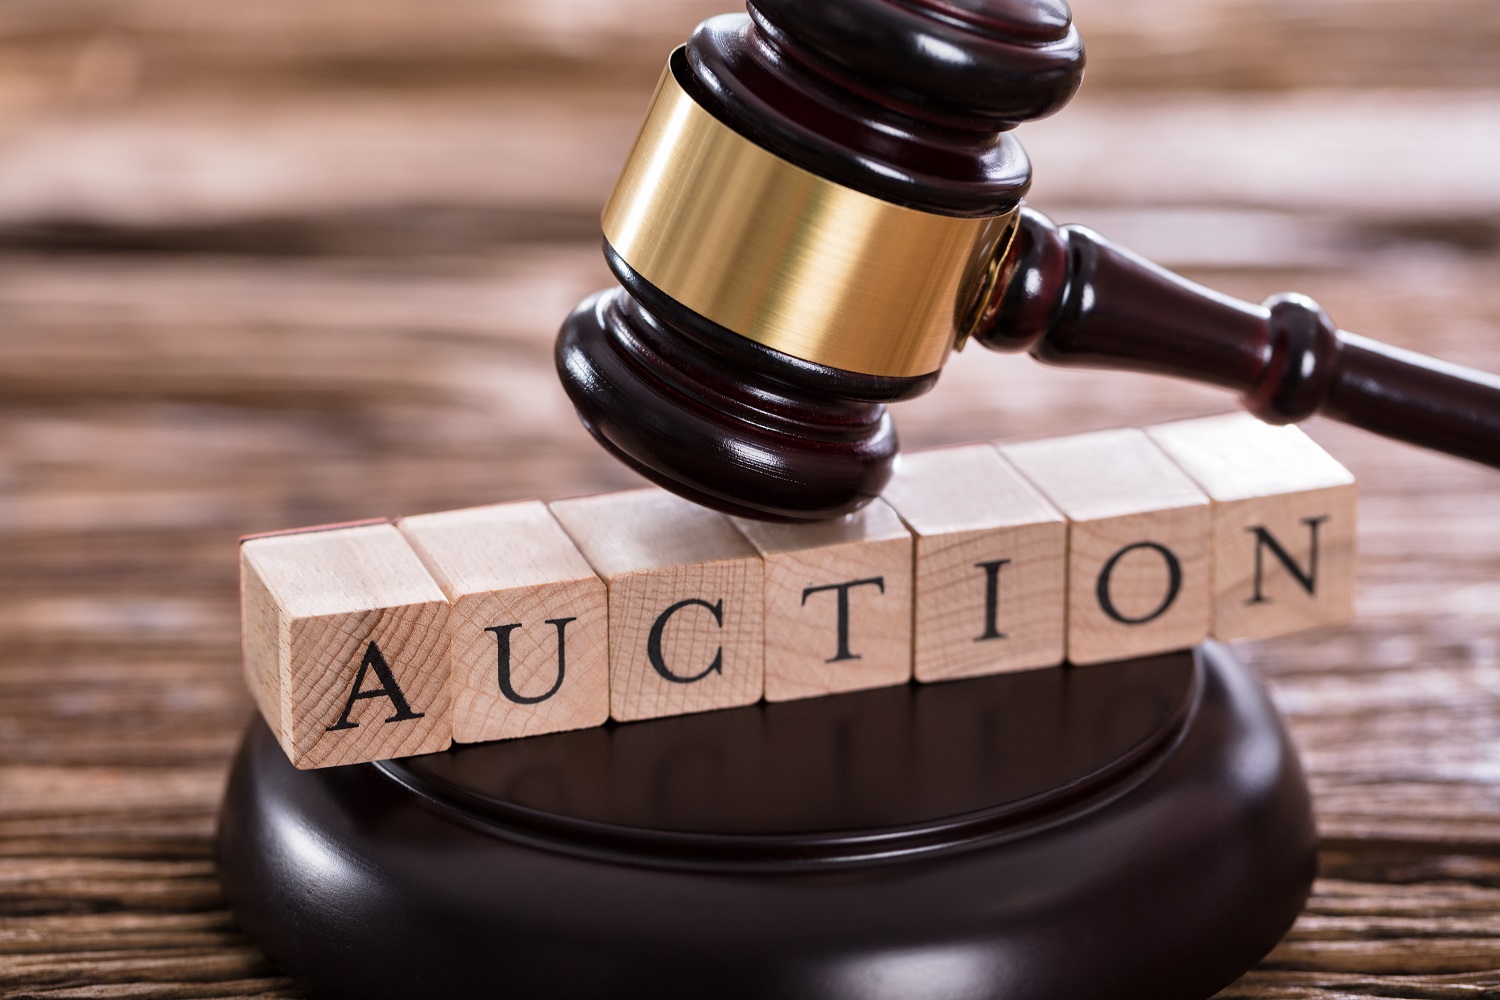 ALL ABOUT CASHING - AUCTIONS